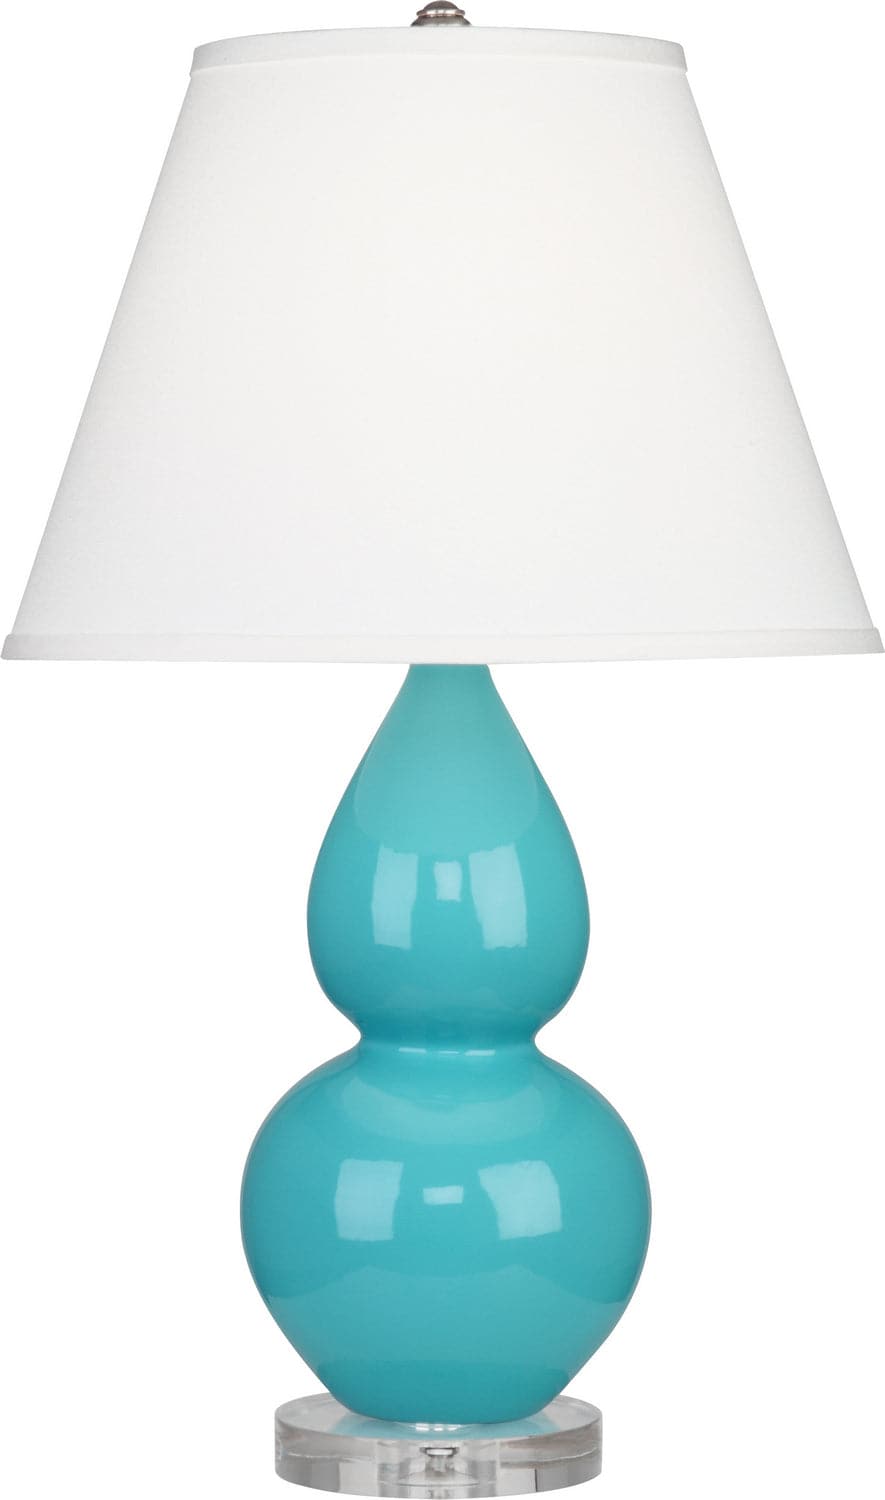 Robert Abbey - A761X - One Light Accent Lamp - Small Double Gourd - Egg Blue Glazed w/Lucite Base